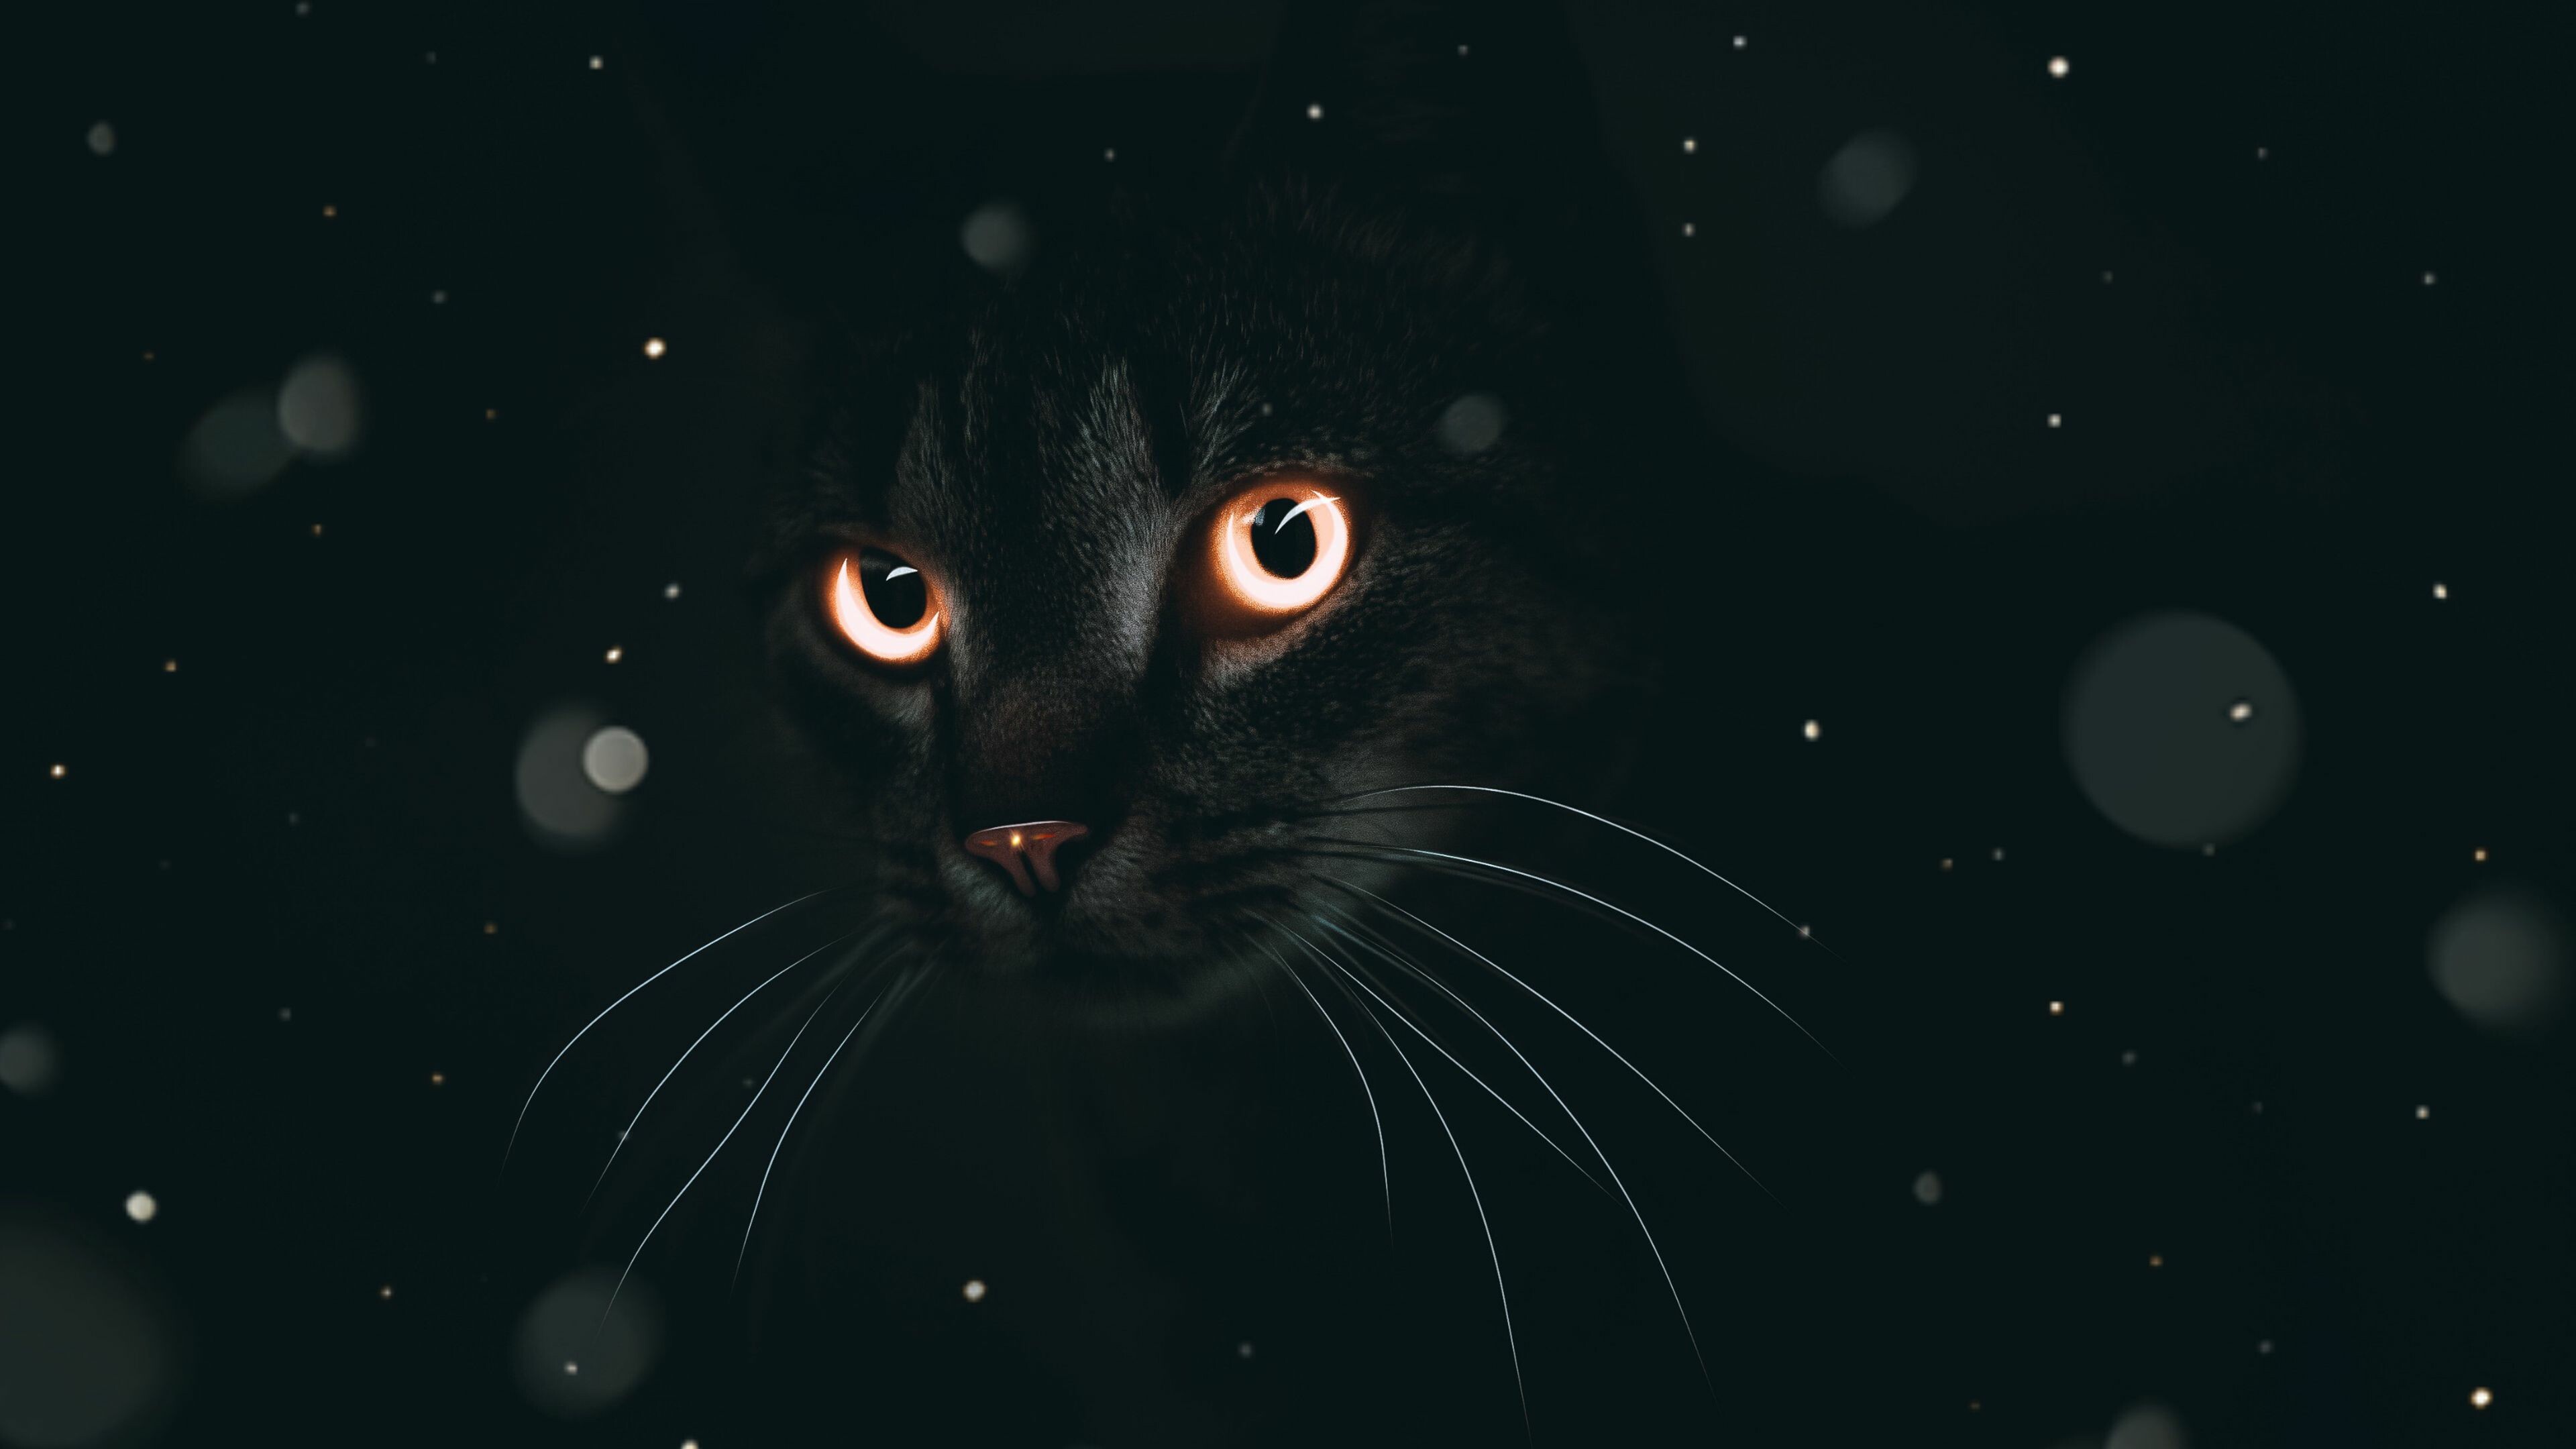 Dark cat, Mysterious and brooding, Shadowy figure, Enigmatic presence, 3840x2160 4K Desktop